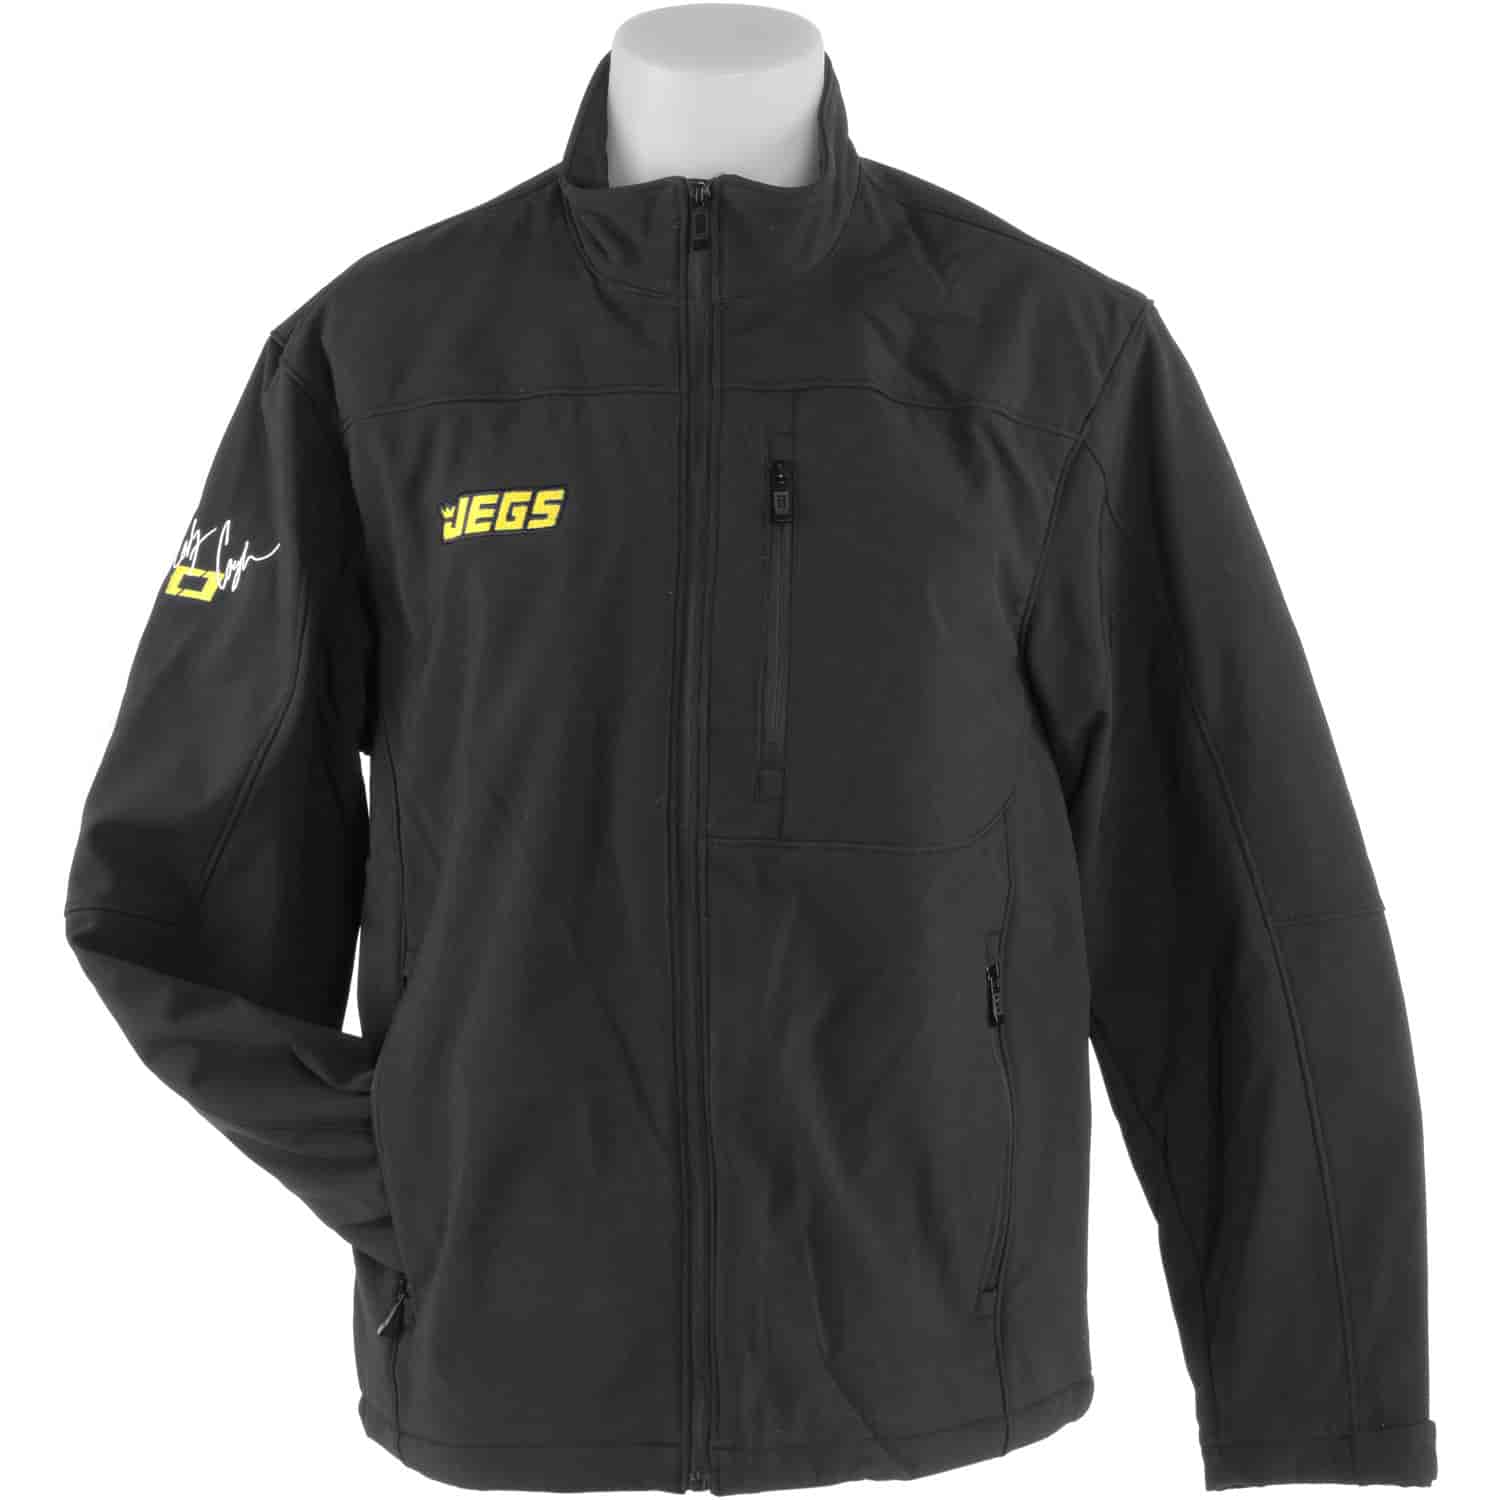 JEGS Cody Coughlin Signature Jacket